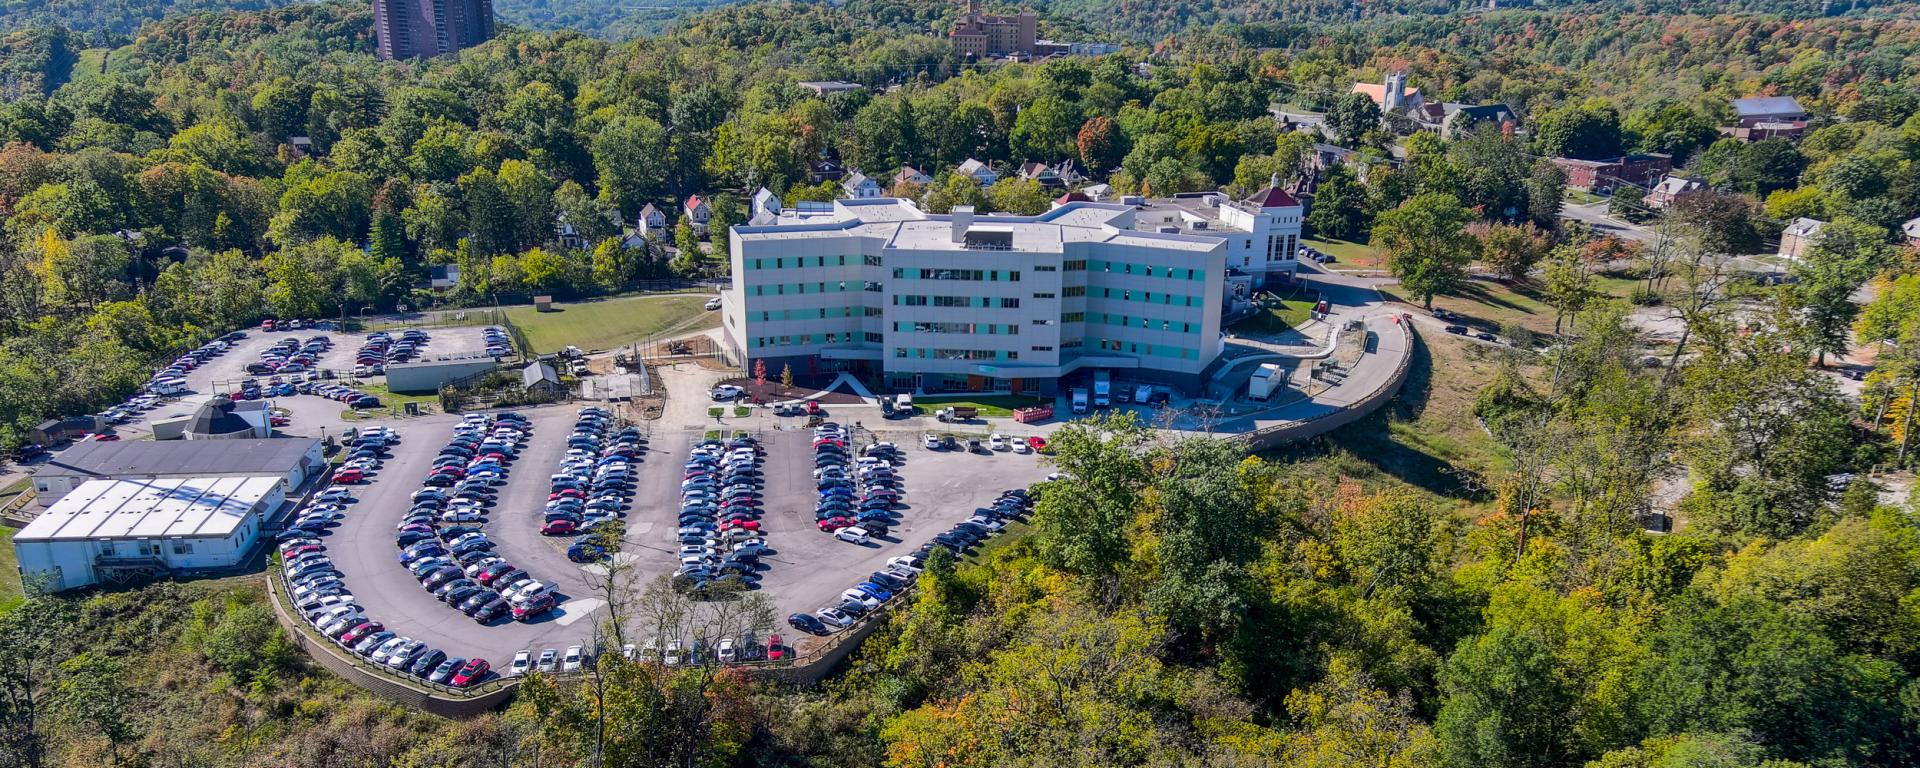 aerial photo of hospital building and parking lot